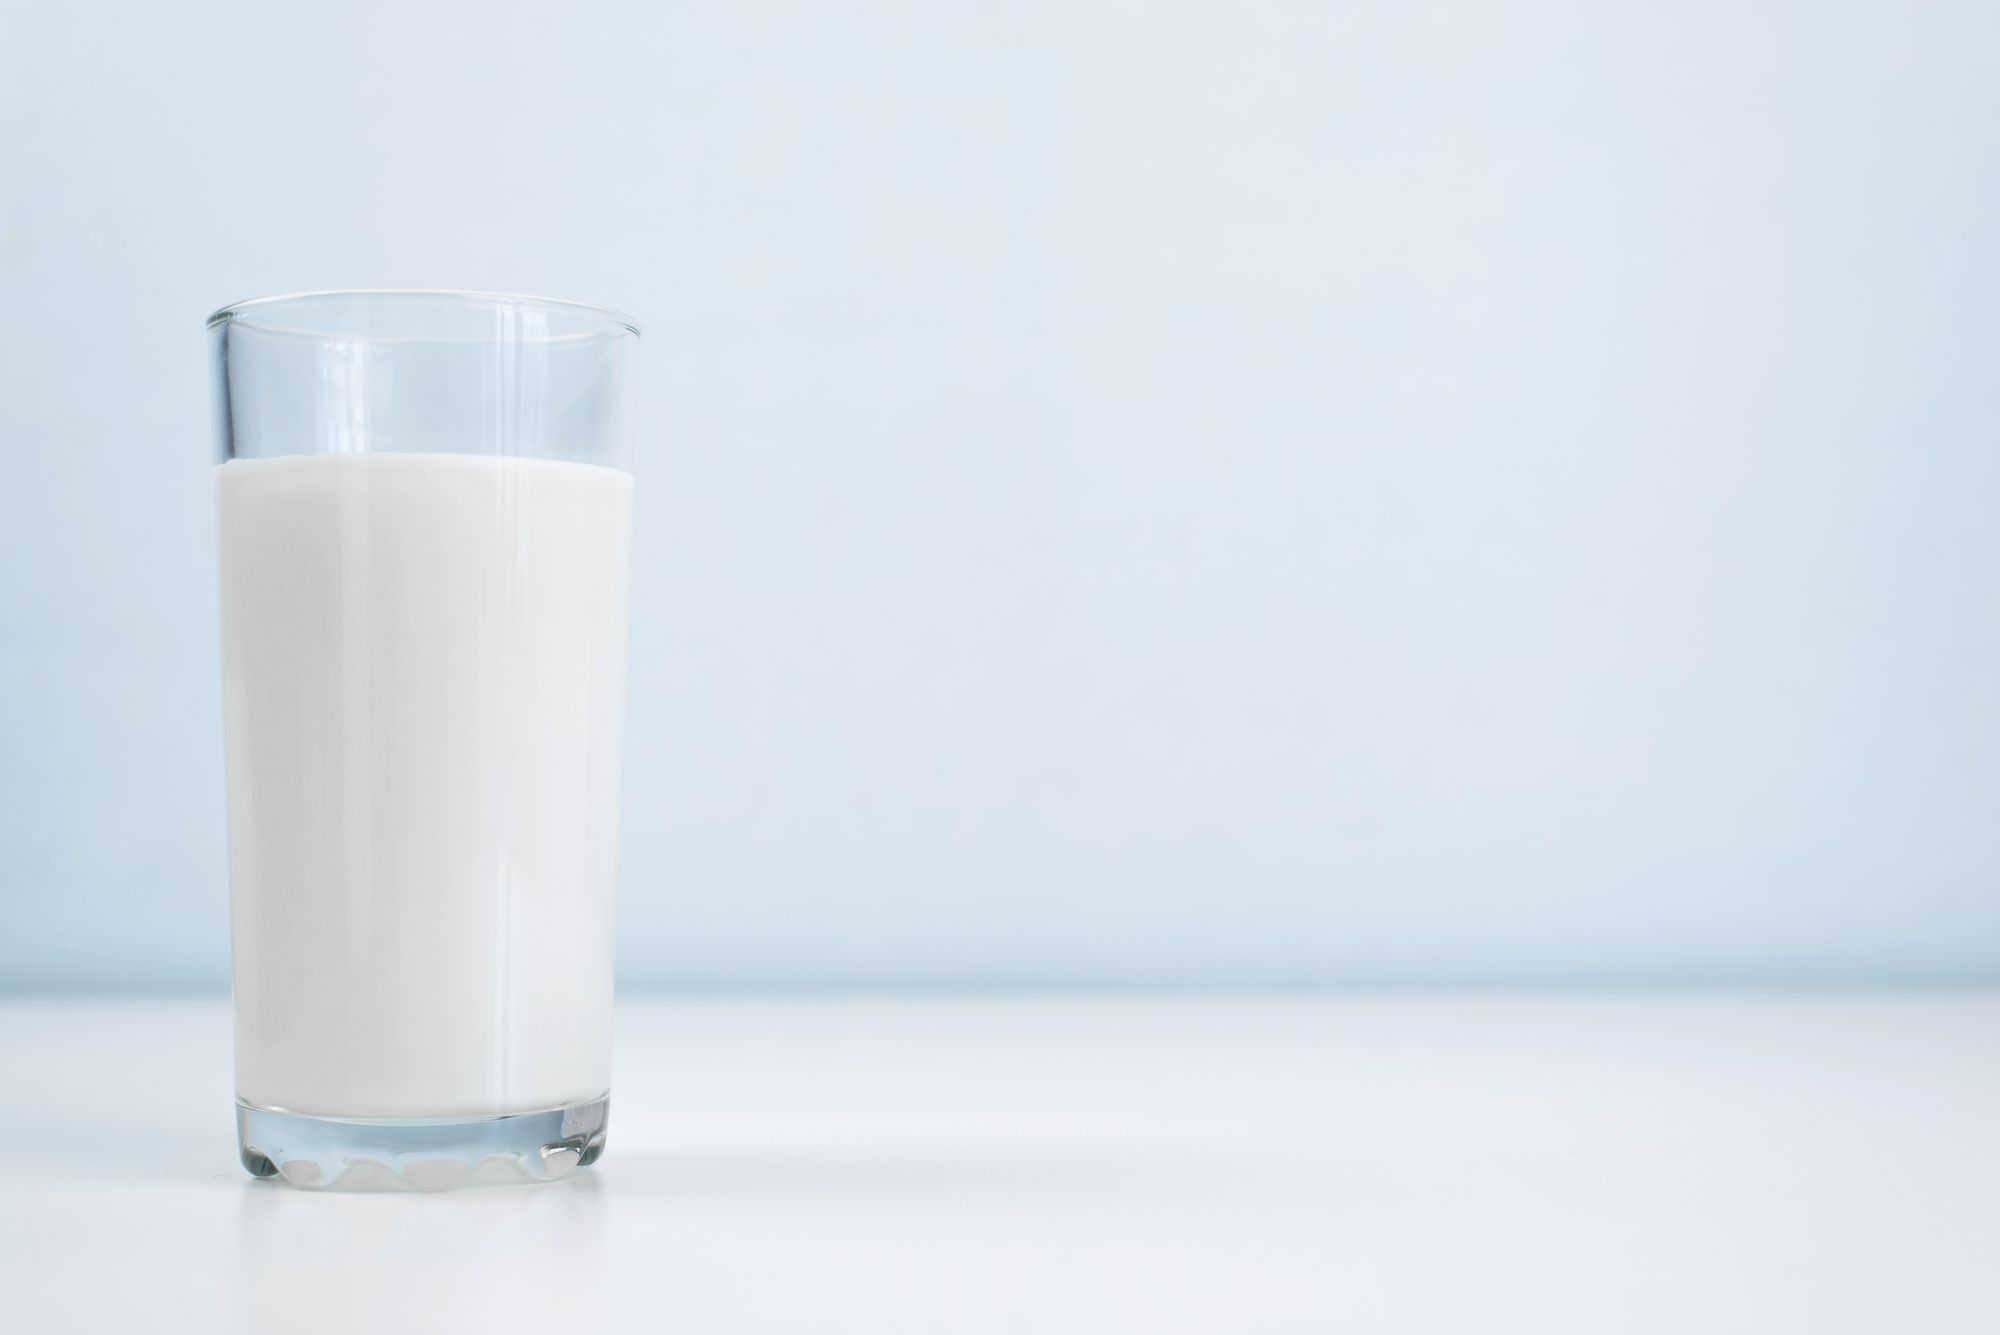 🥛A $21 Million Class Action Settlement has been reached after a lawsuit was filed against Milk manufacturers